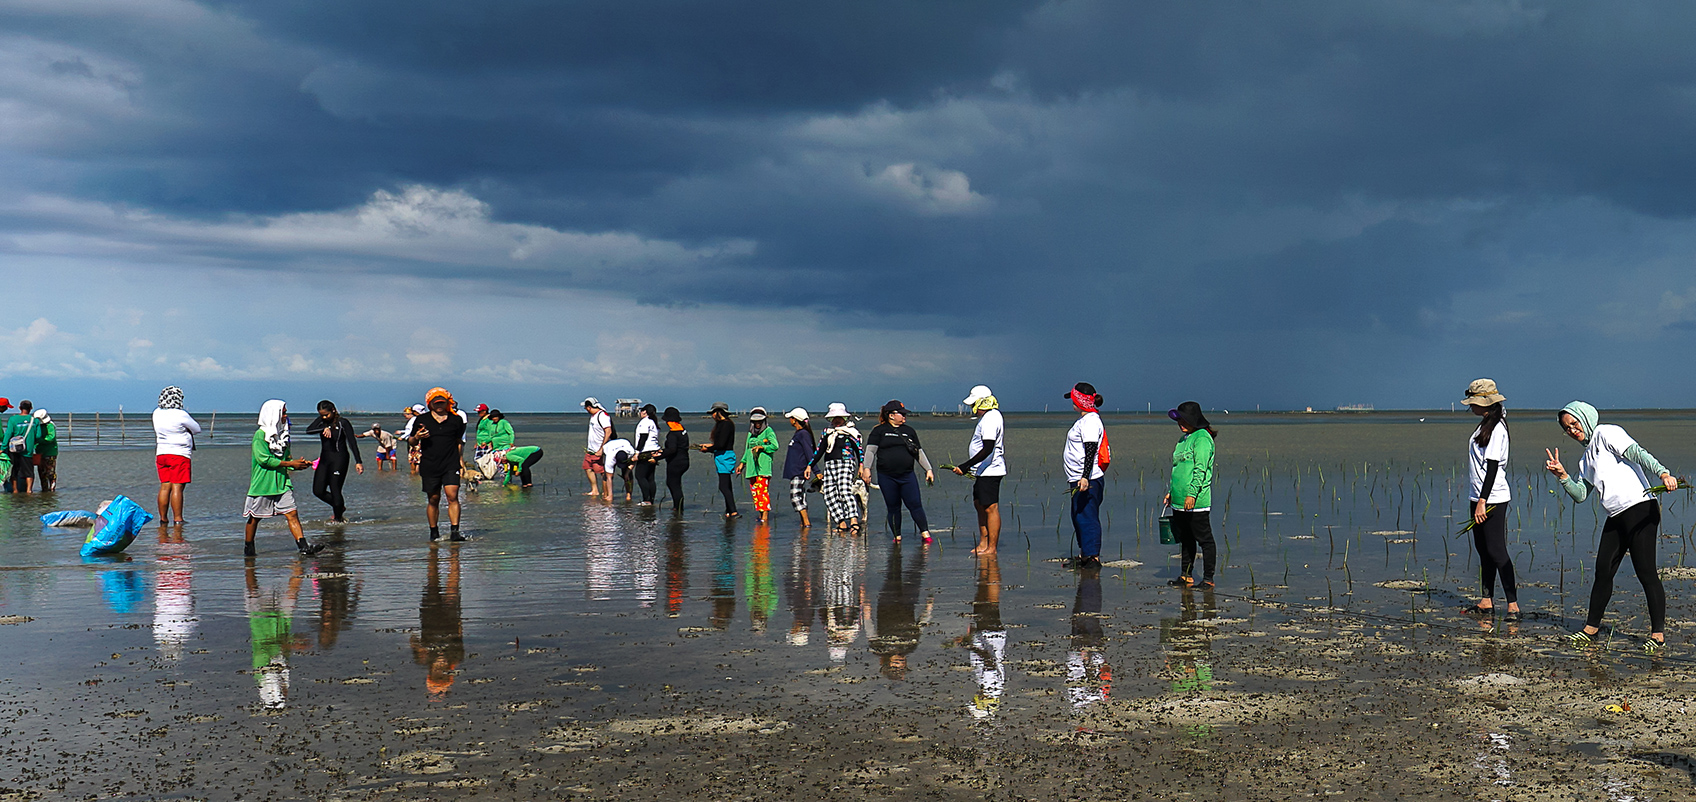 Photos of people planting mangroves on the beach